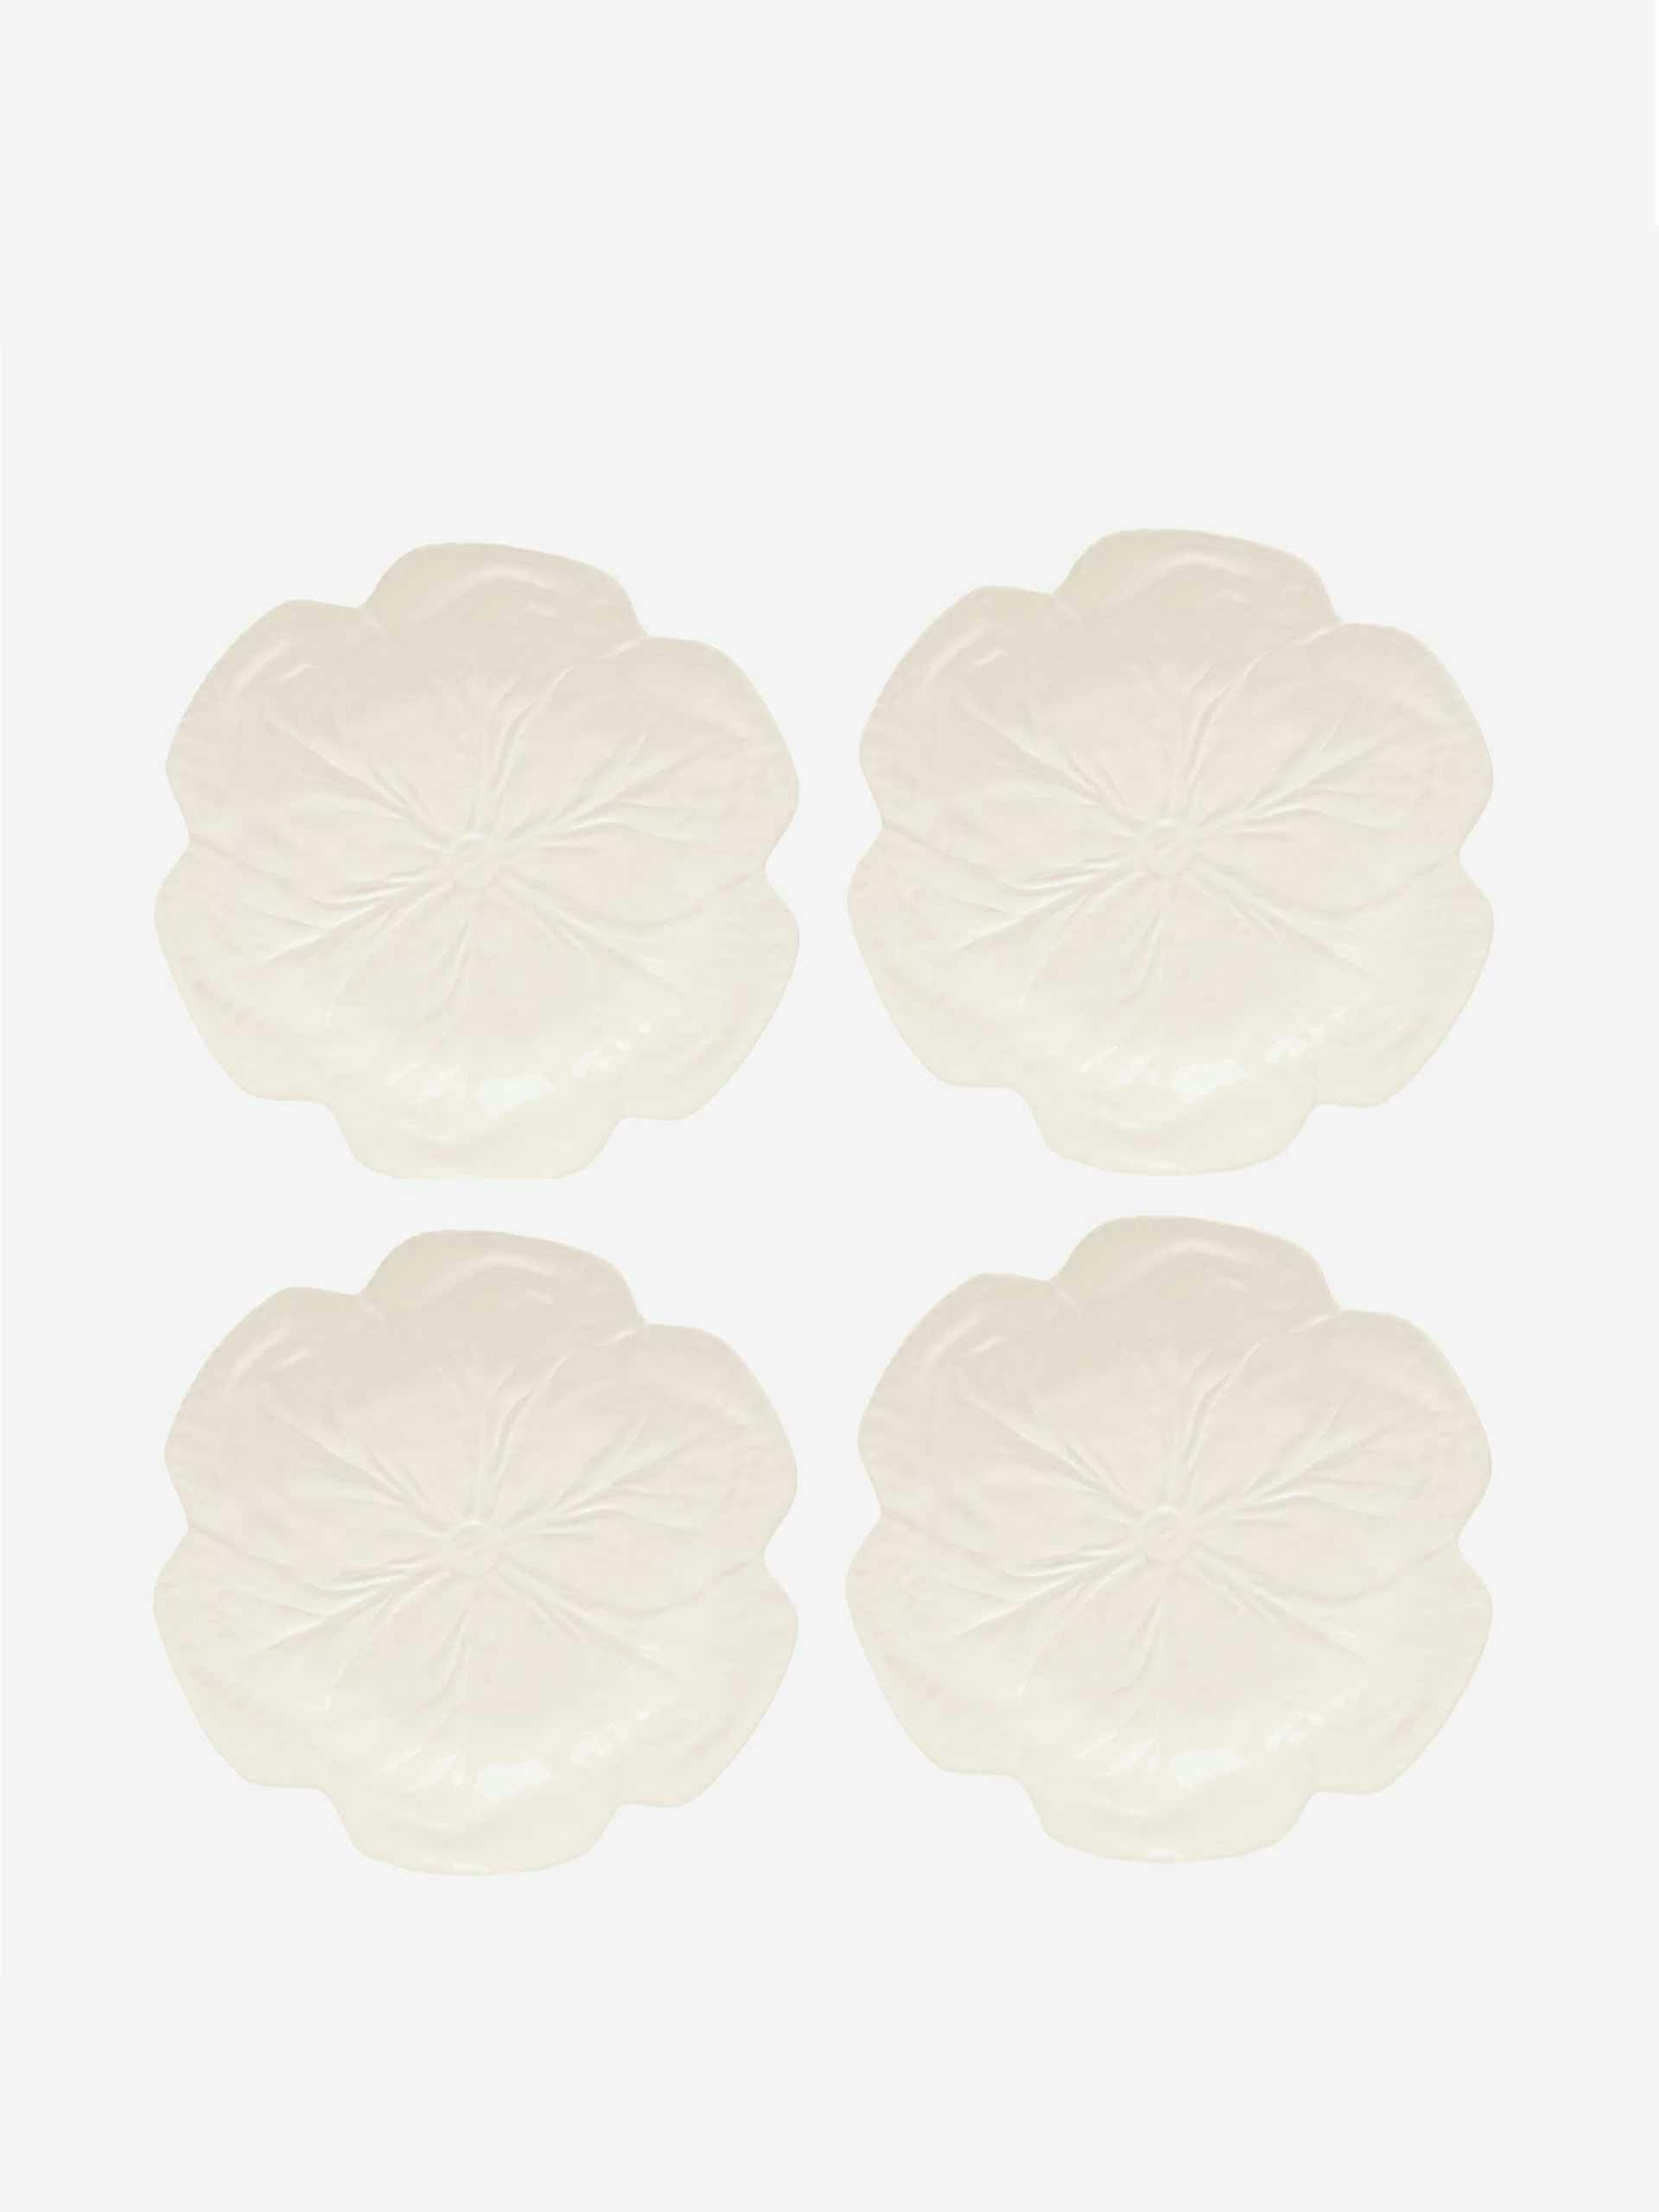 Cabbage earthenware dinner plates (set of 4)